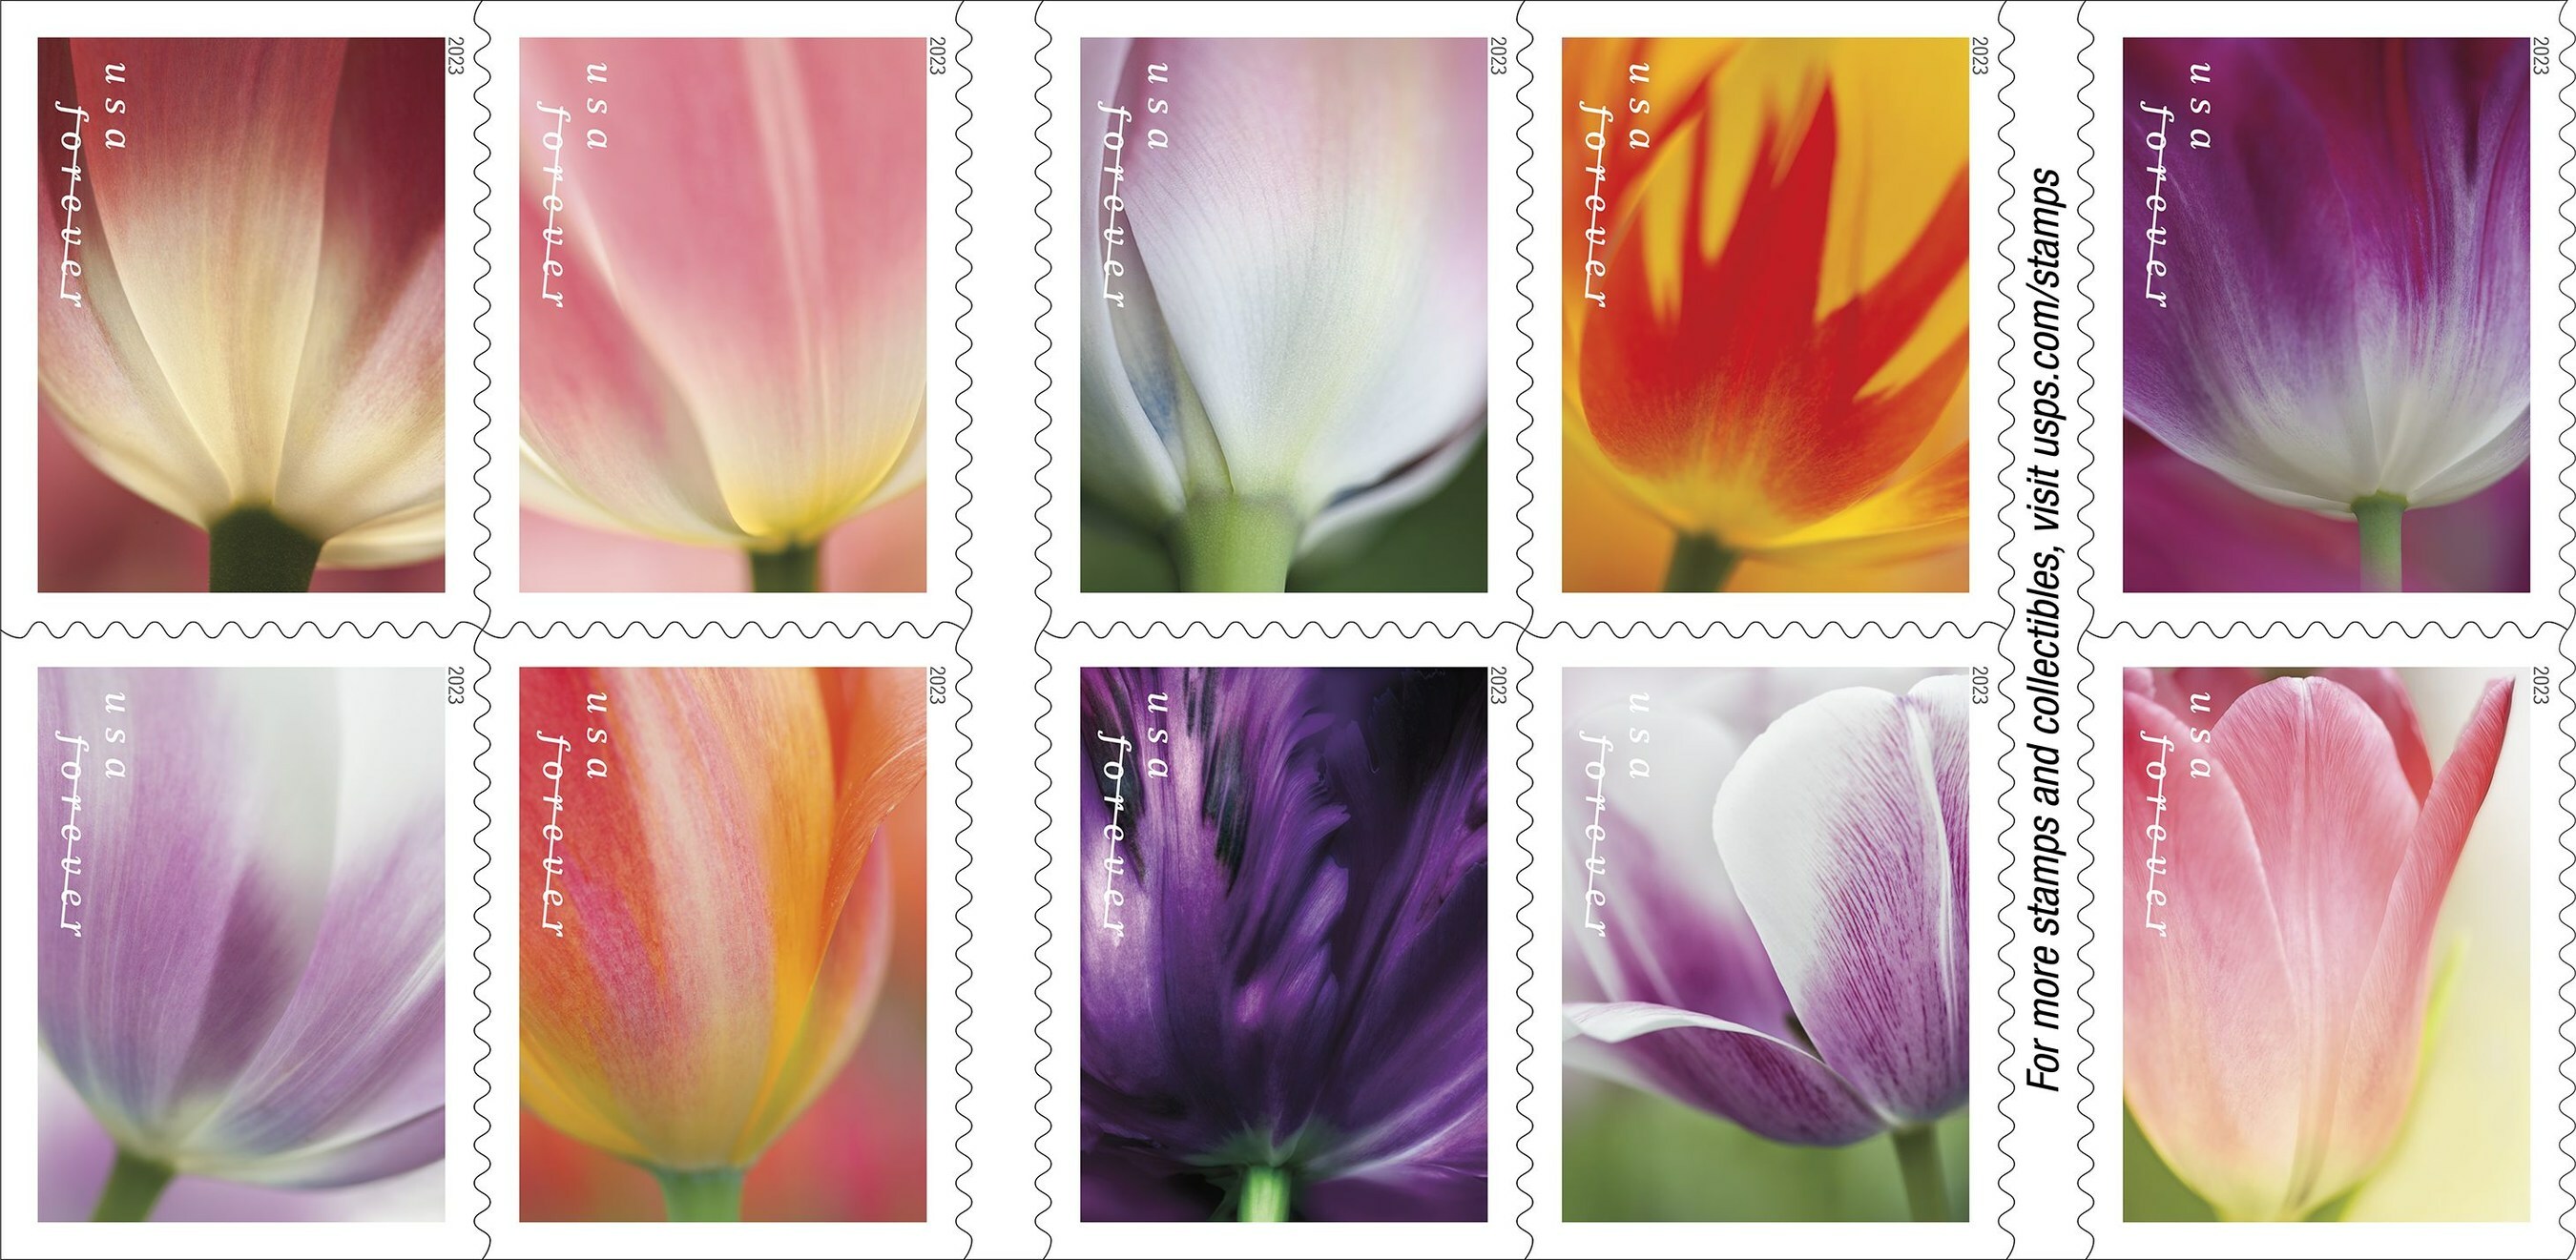 USPS increases price of Forever Stamps to 63 cents